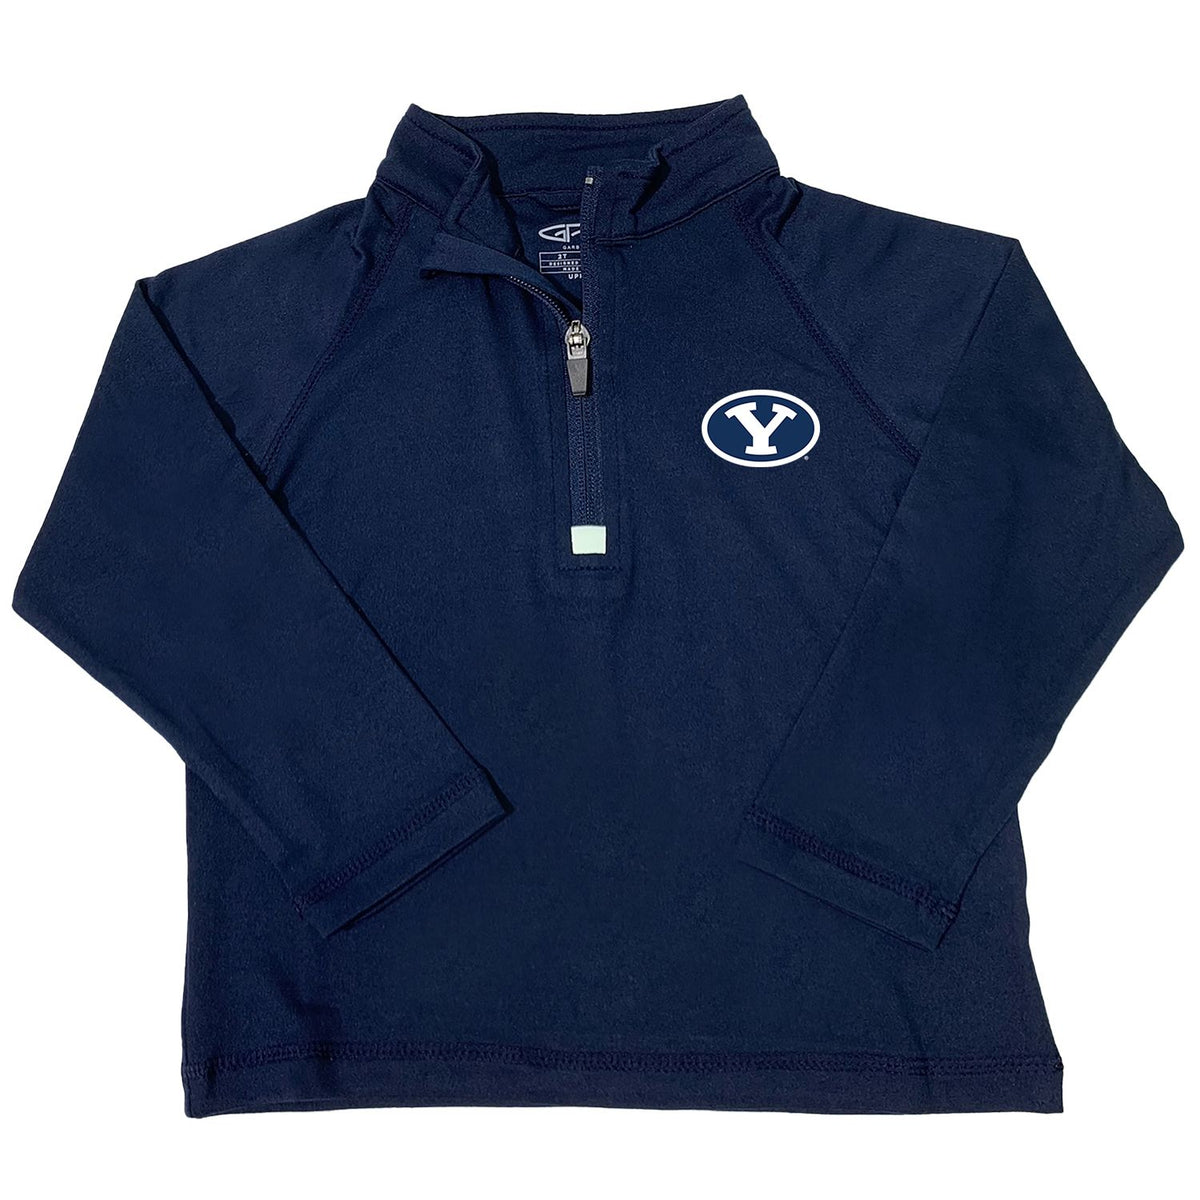 Brigham Young Cougars Toddler Boys' 1/4-Zip Pullover